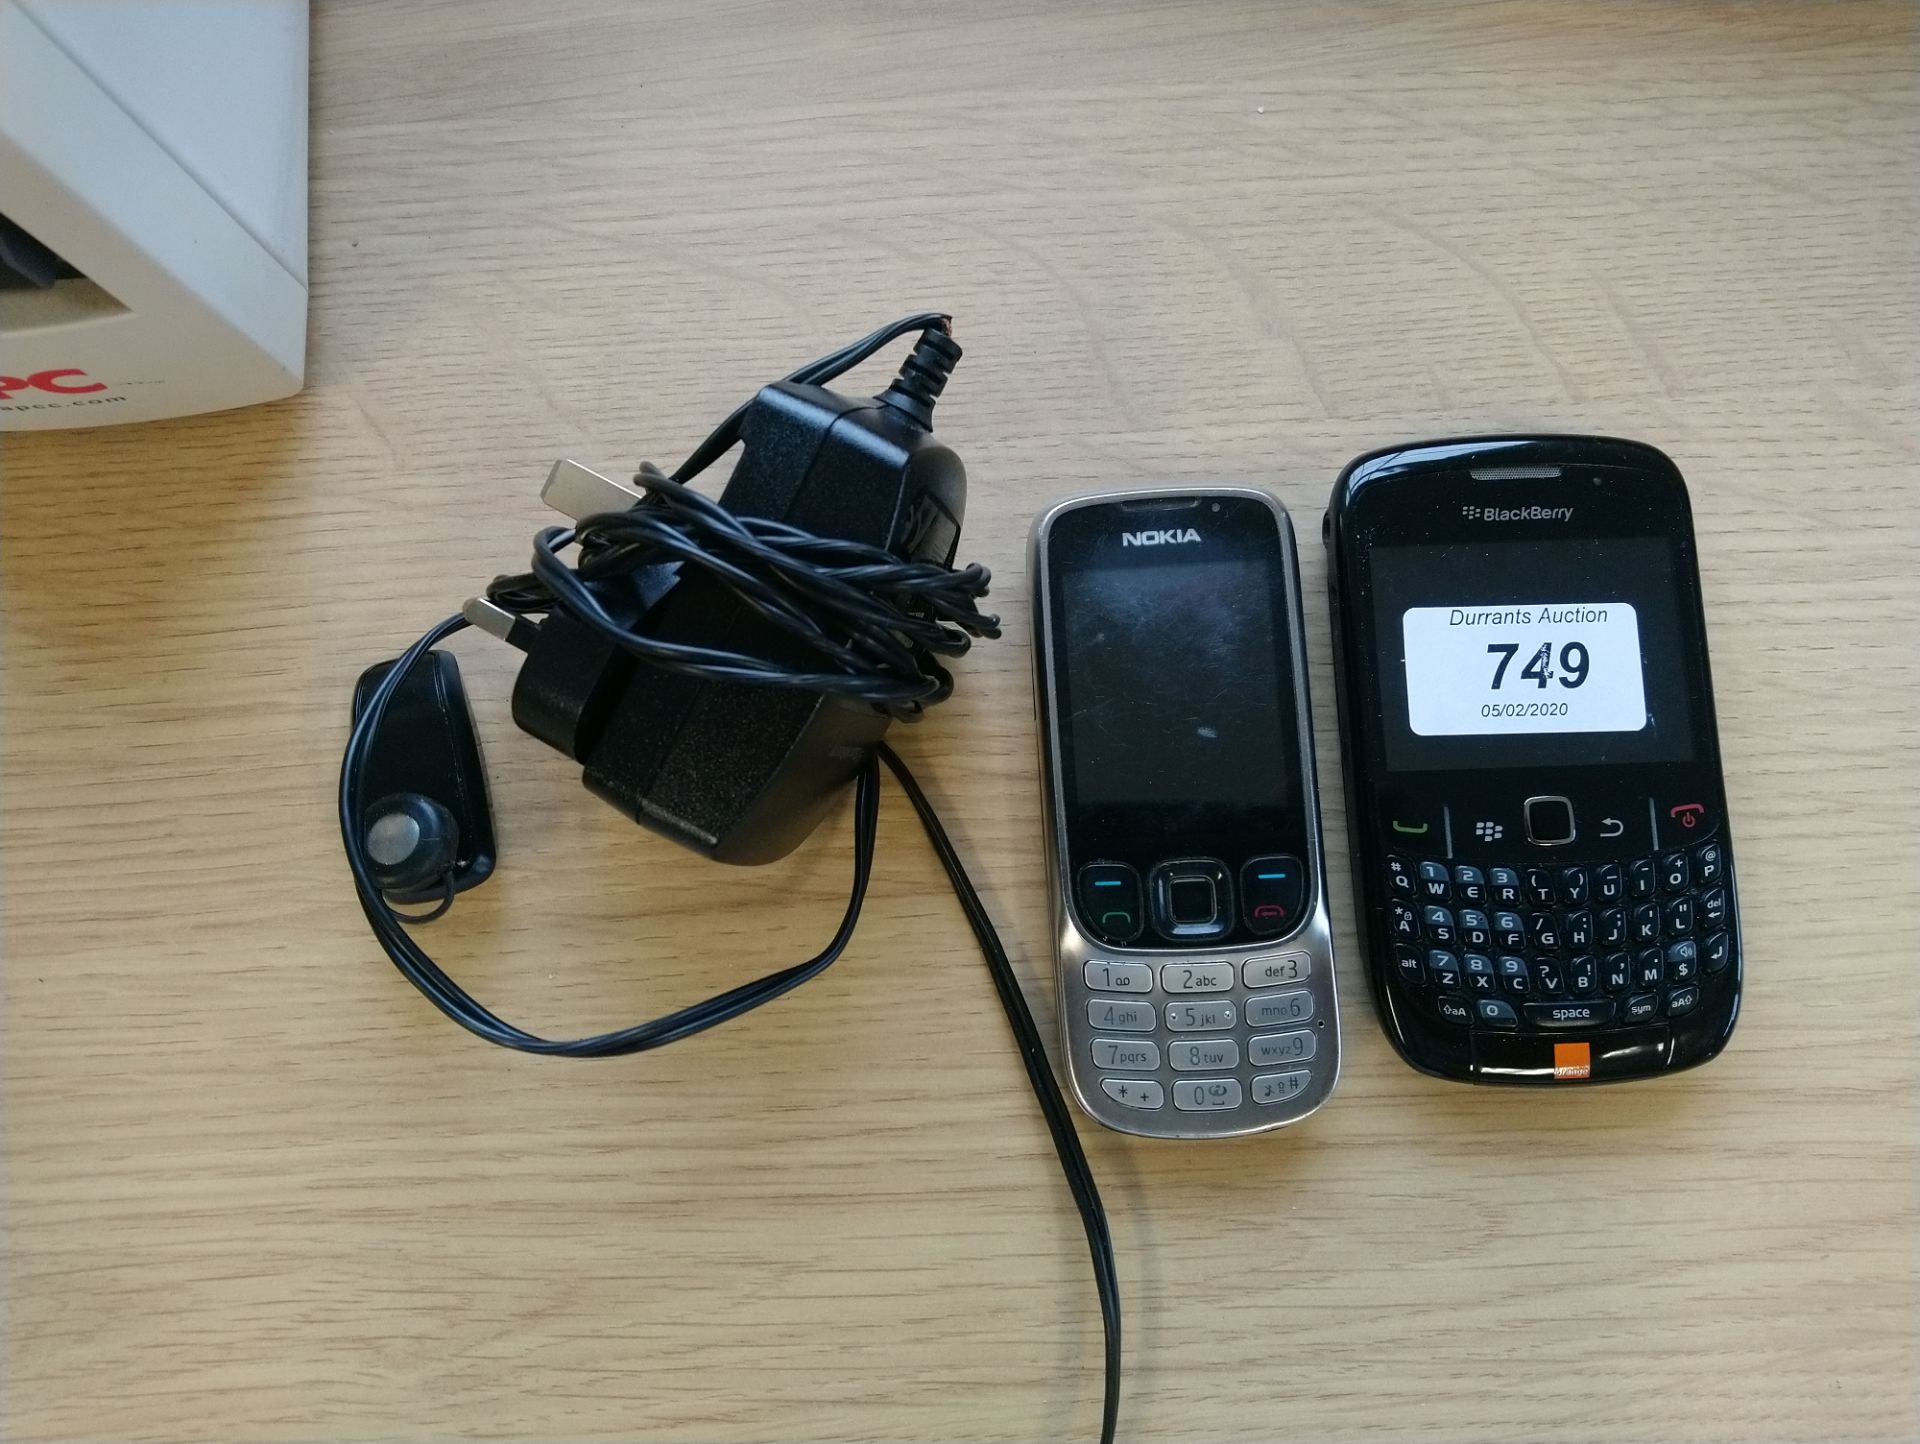 Blackberry Curve and Nokia Mobile Phones